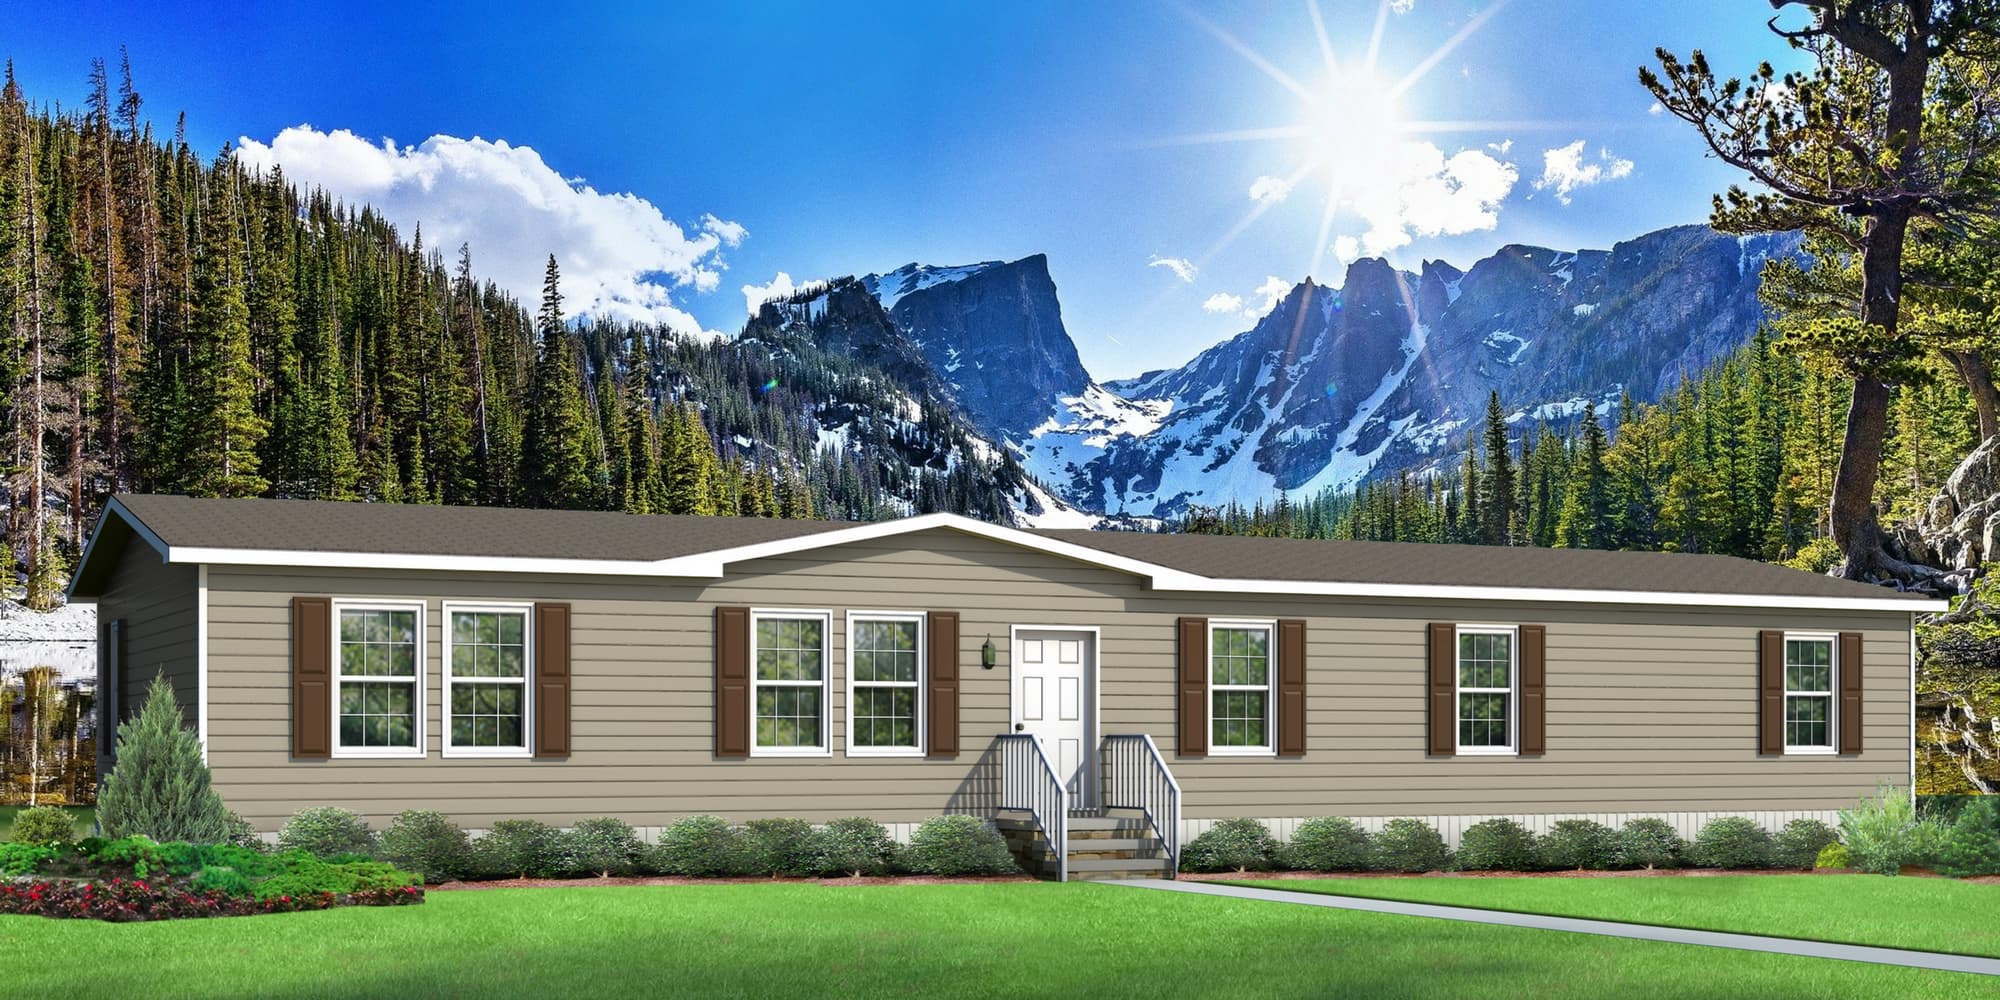 1 Manufactured Home Loan Lender In All 50 States Manufactured Nationwide Home Loans